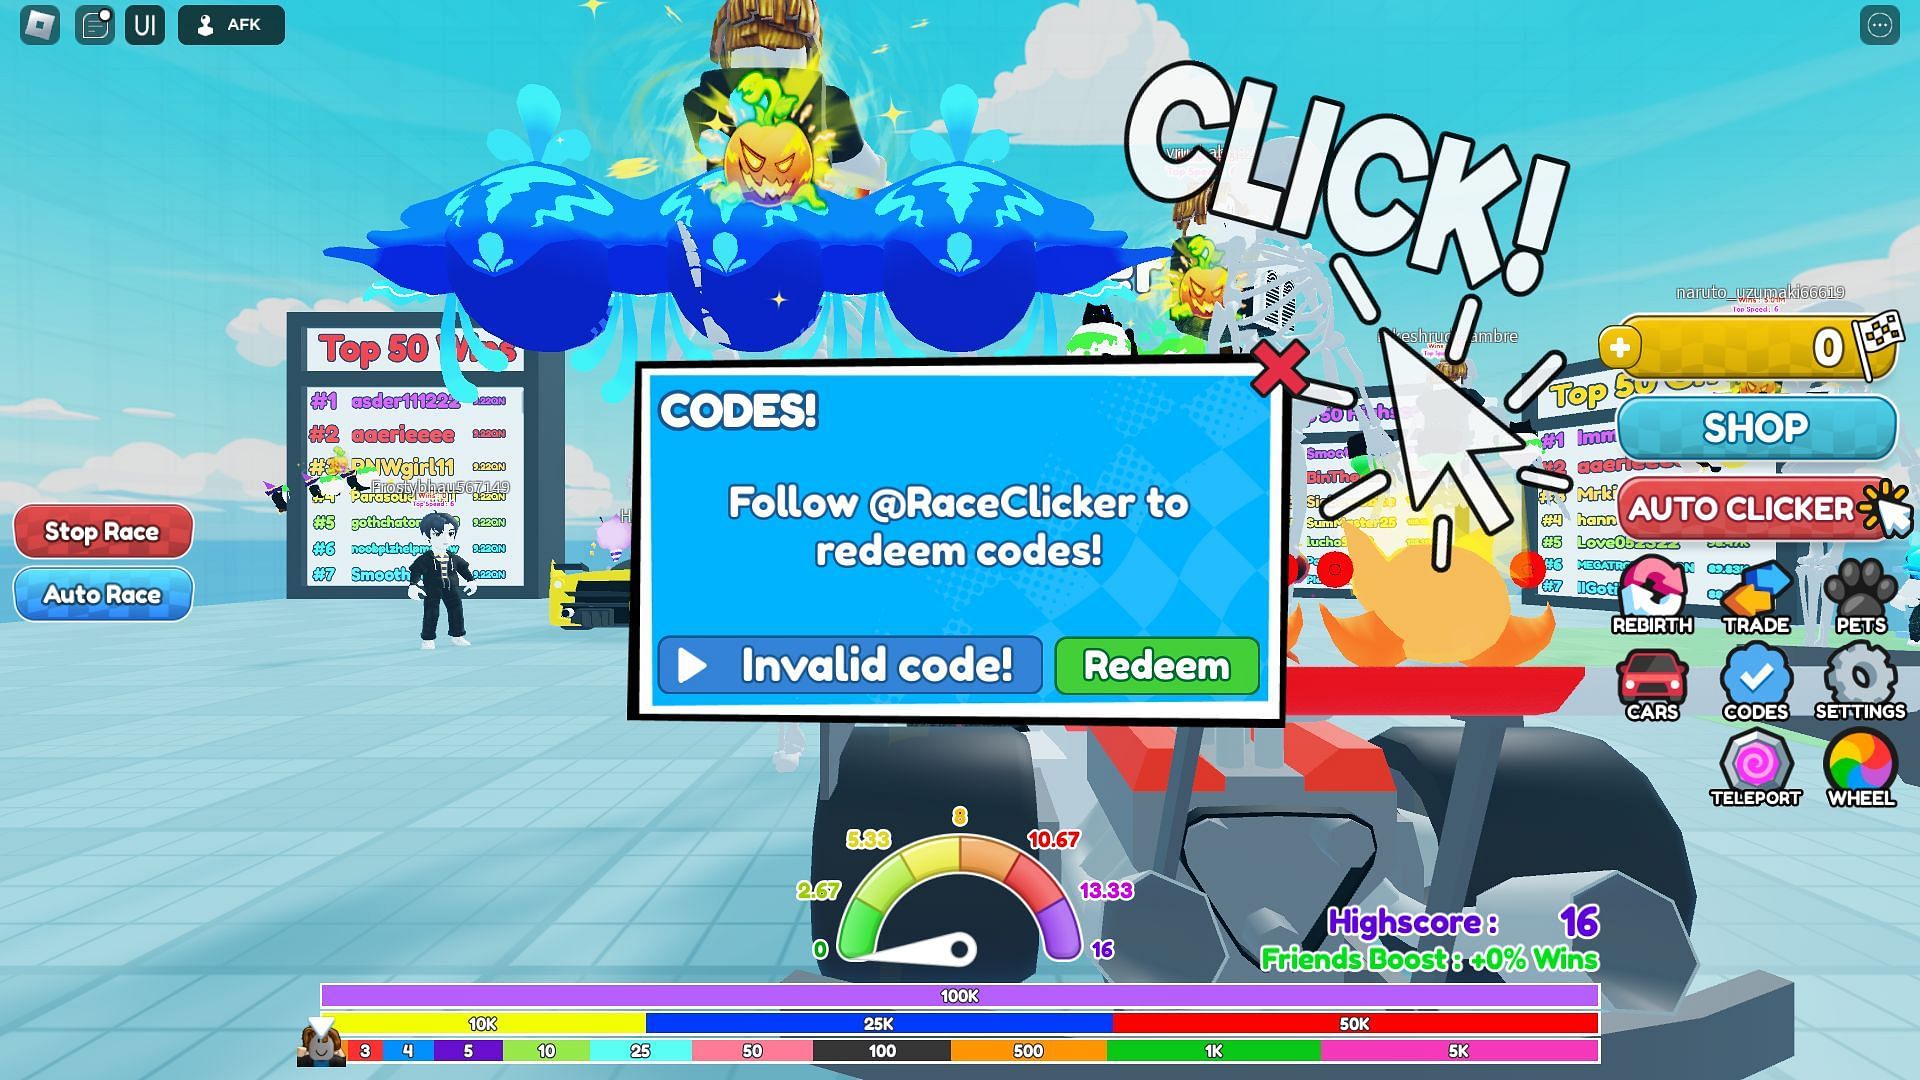 Invalid code in Race Clicker (Image by Roblox and Sportskeeda)